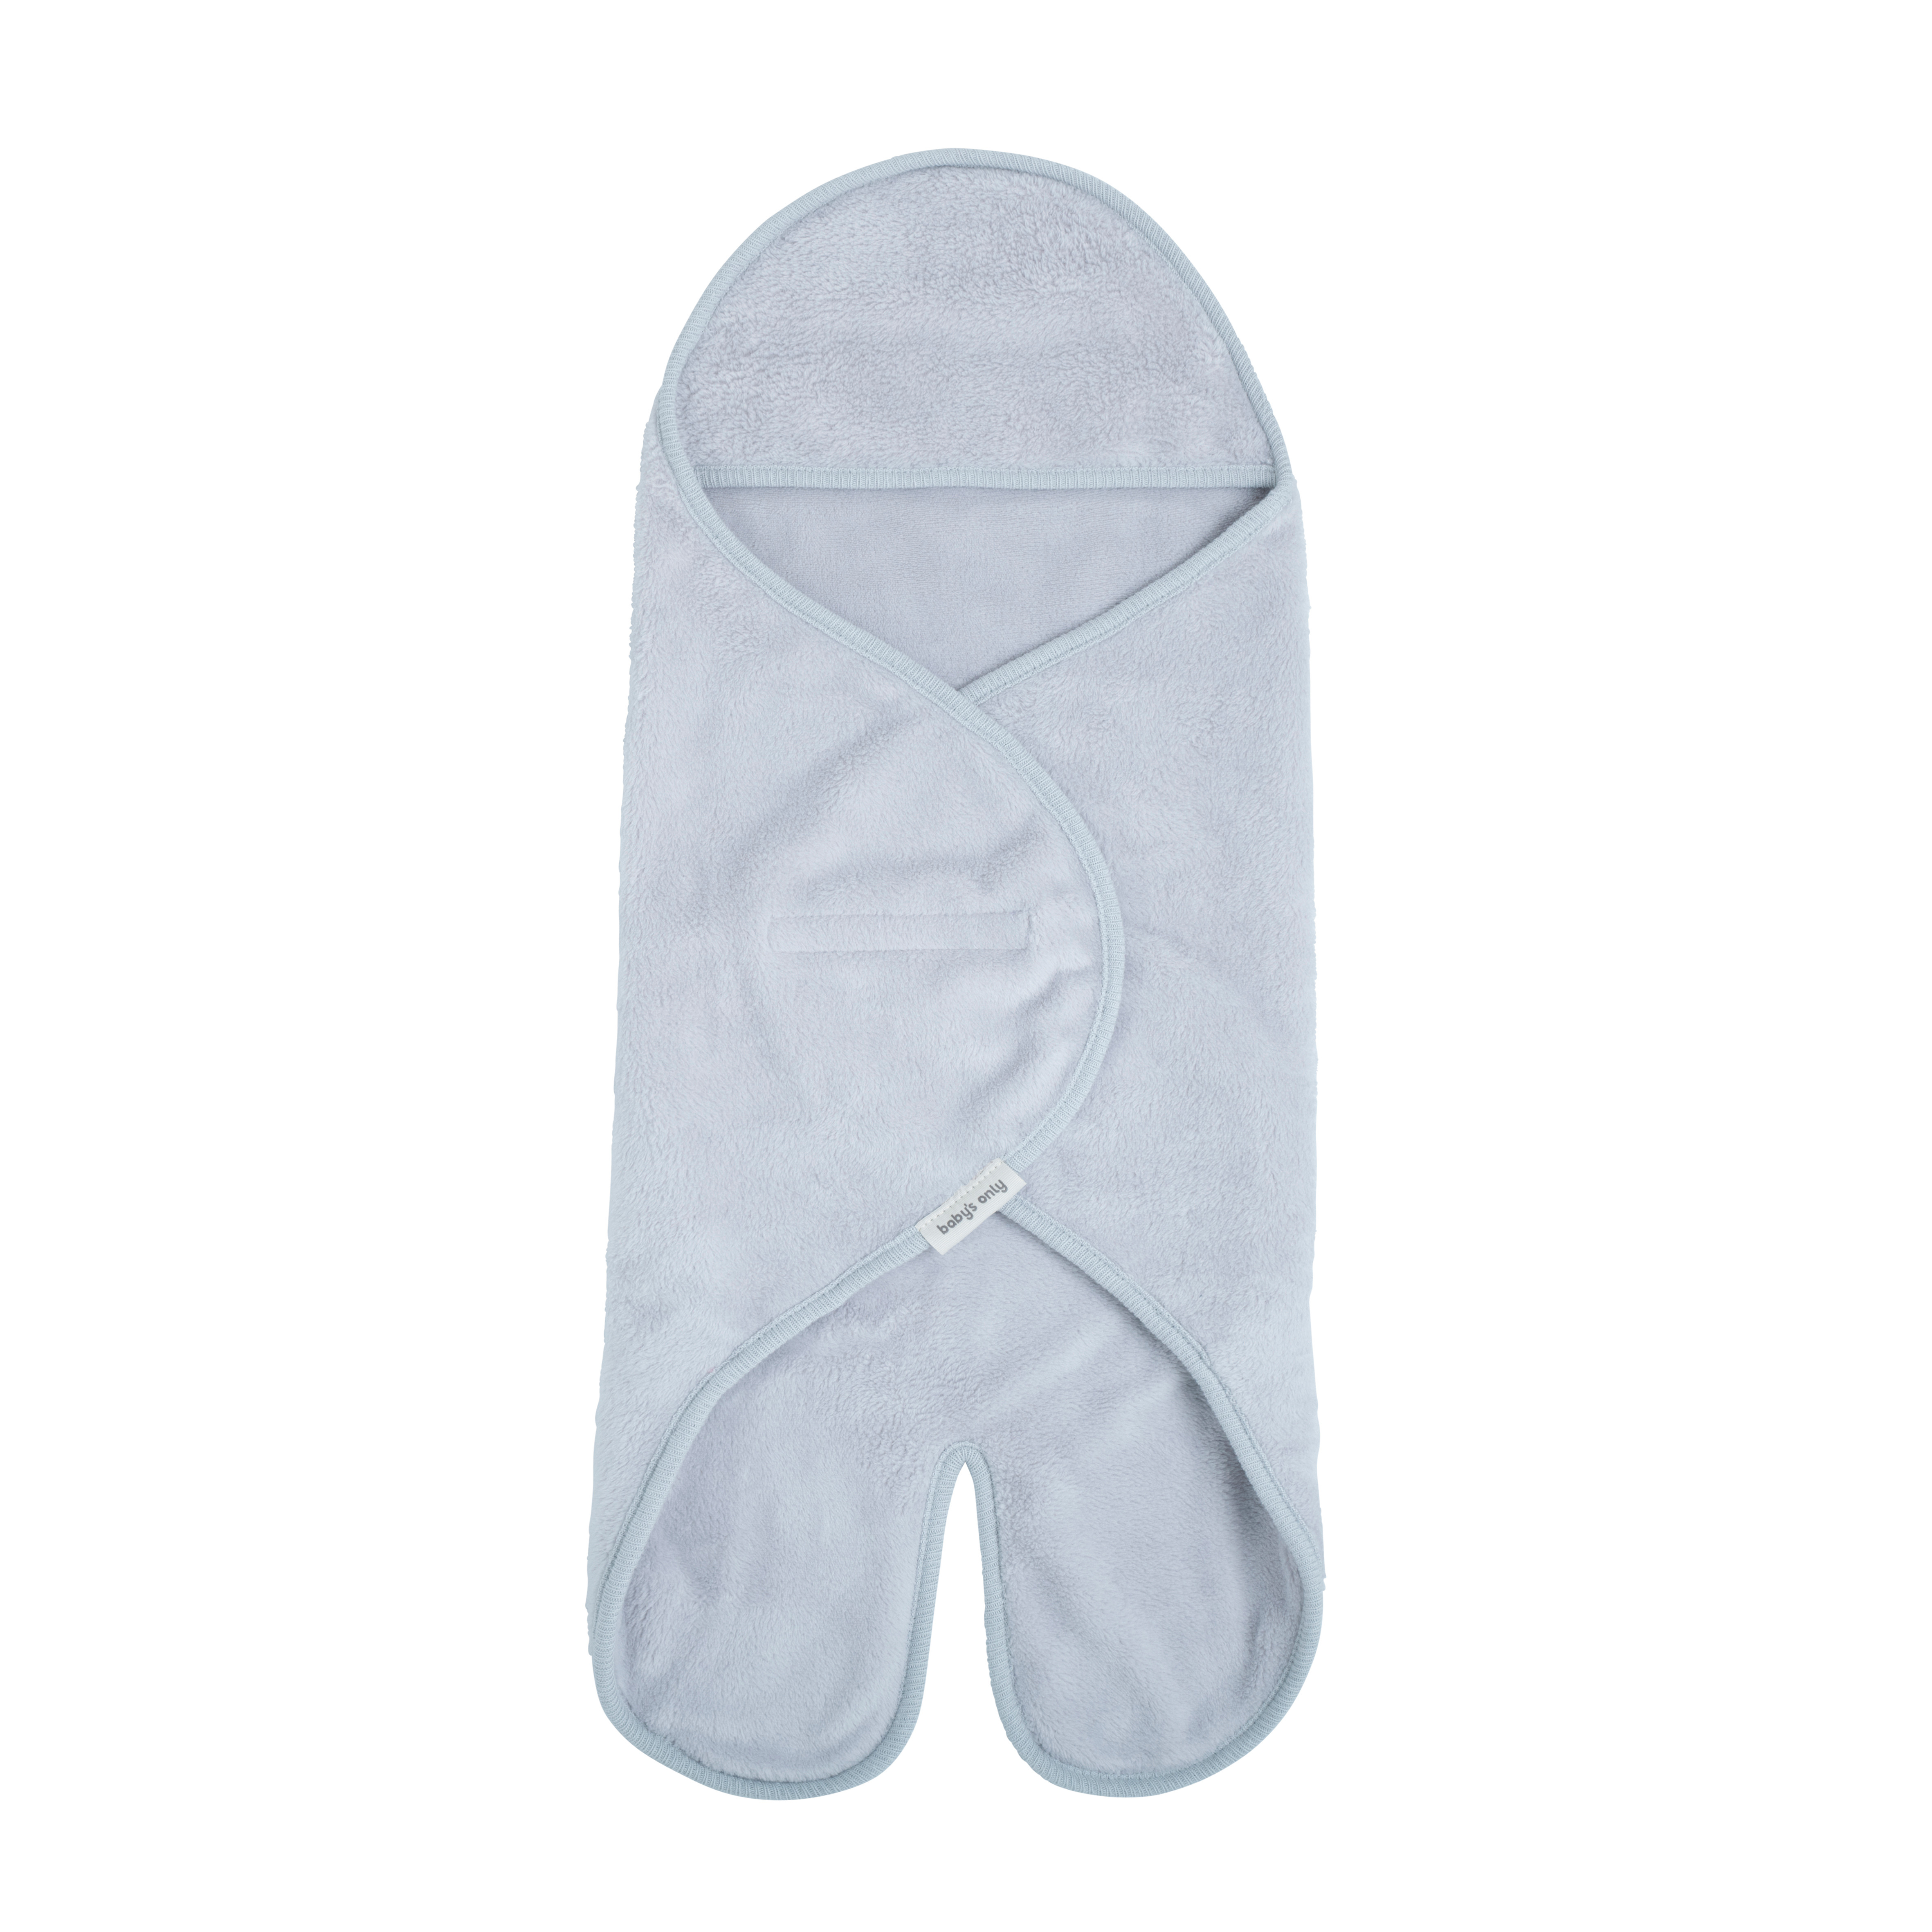 Hooded baby blanket with feet Cozy misty blue